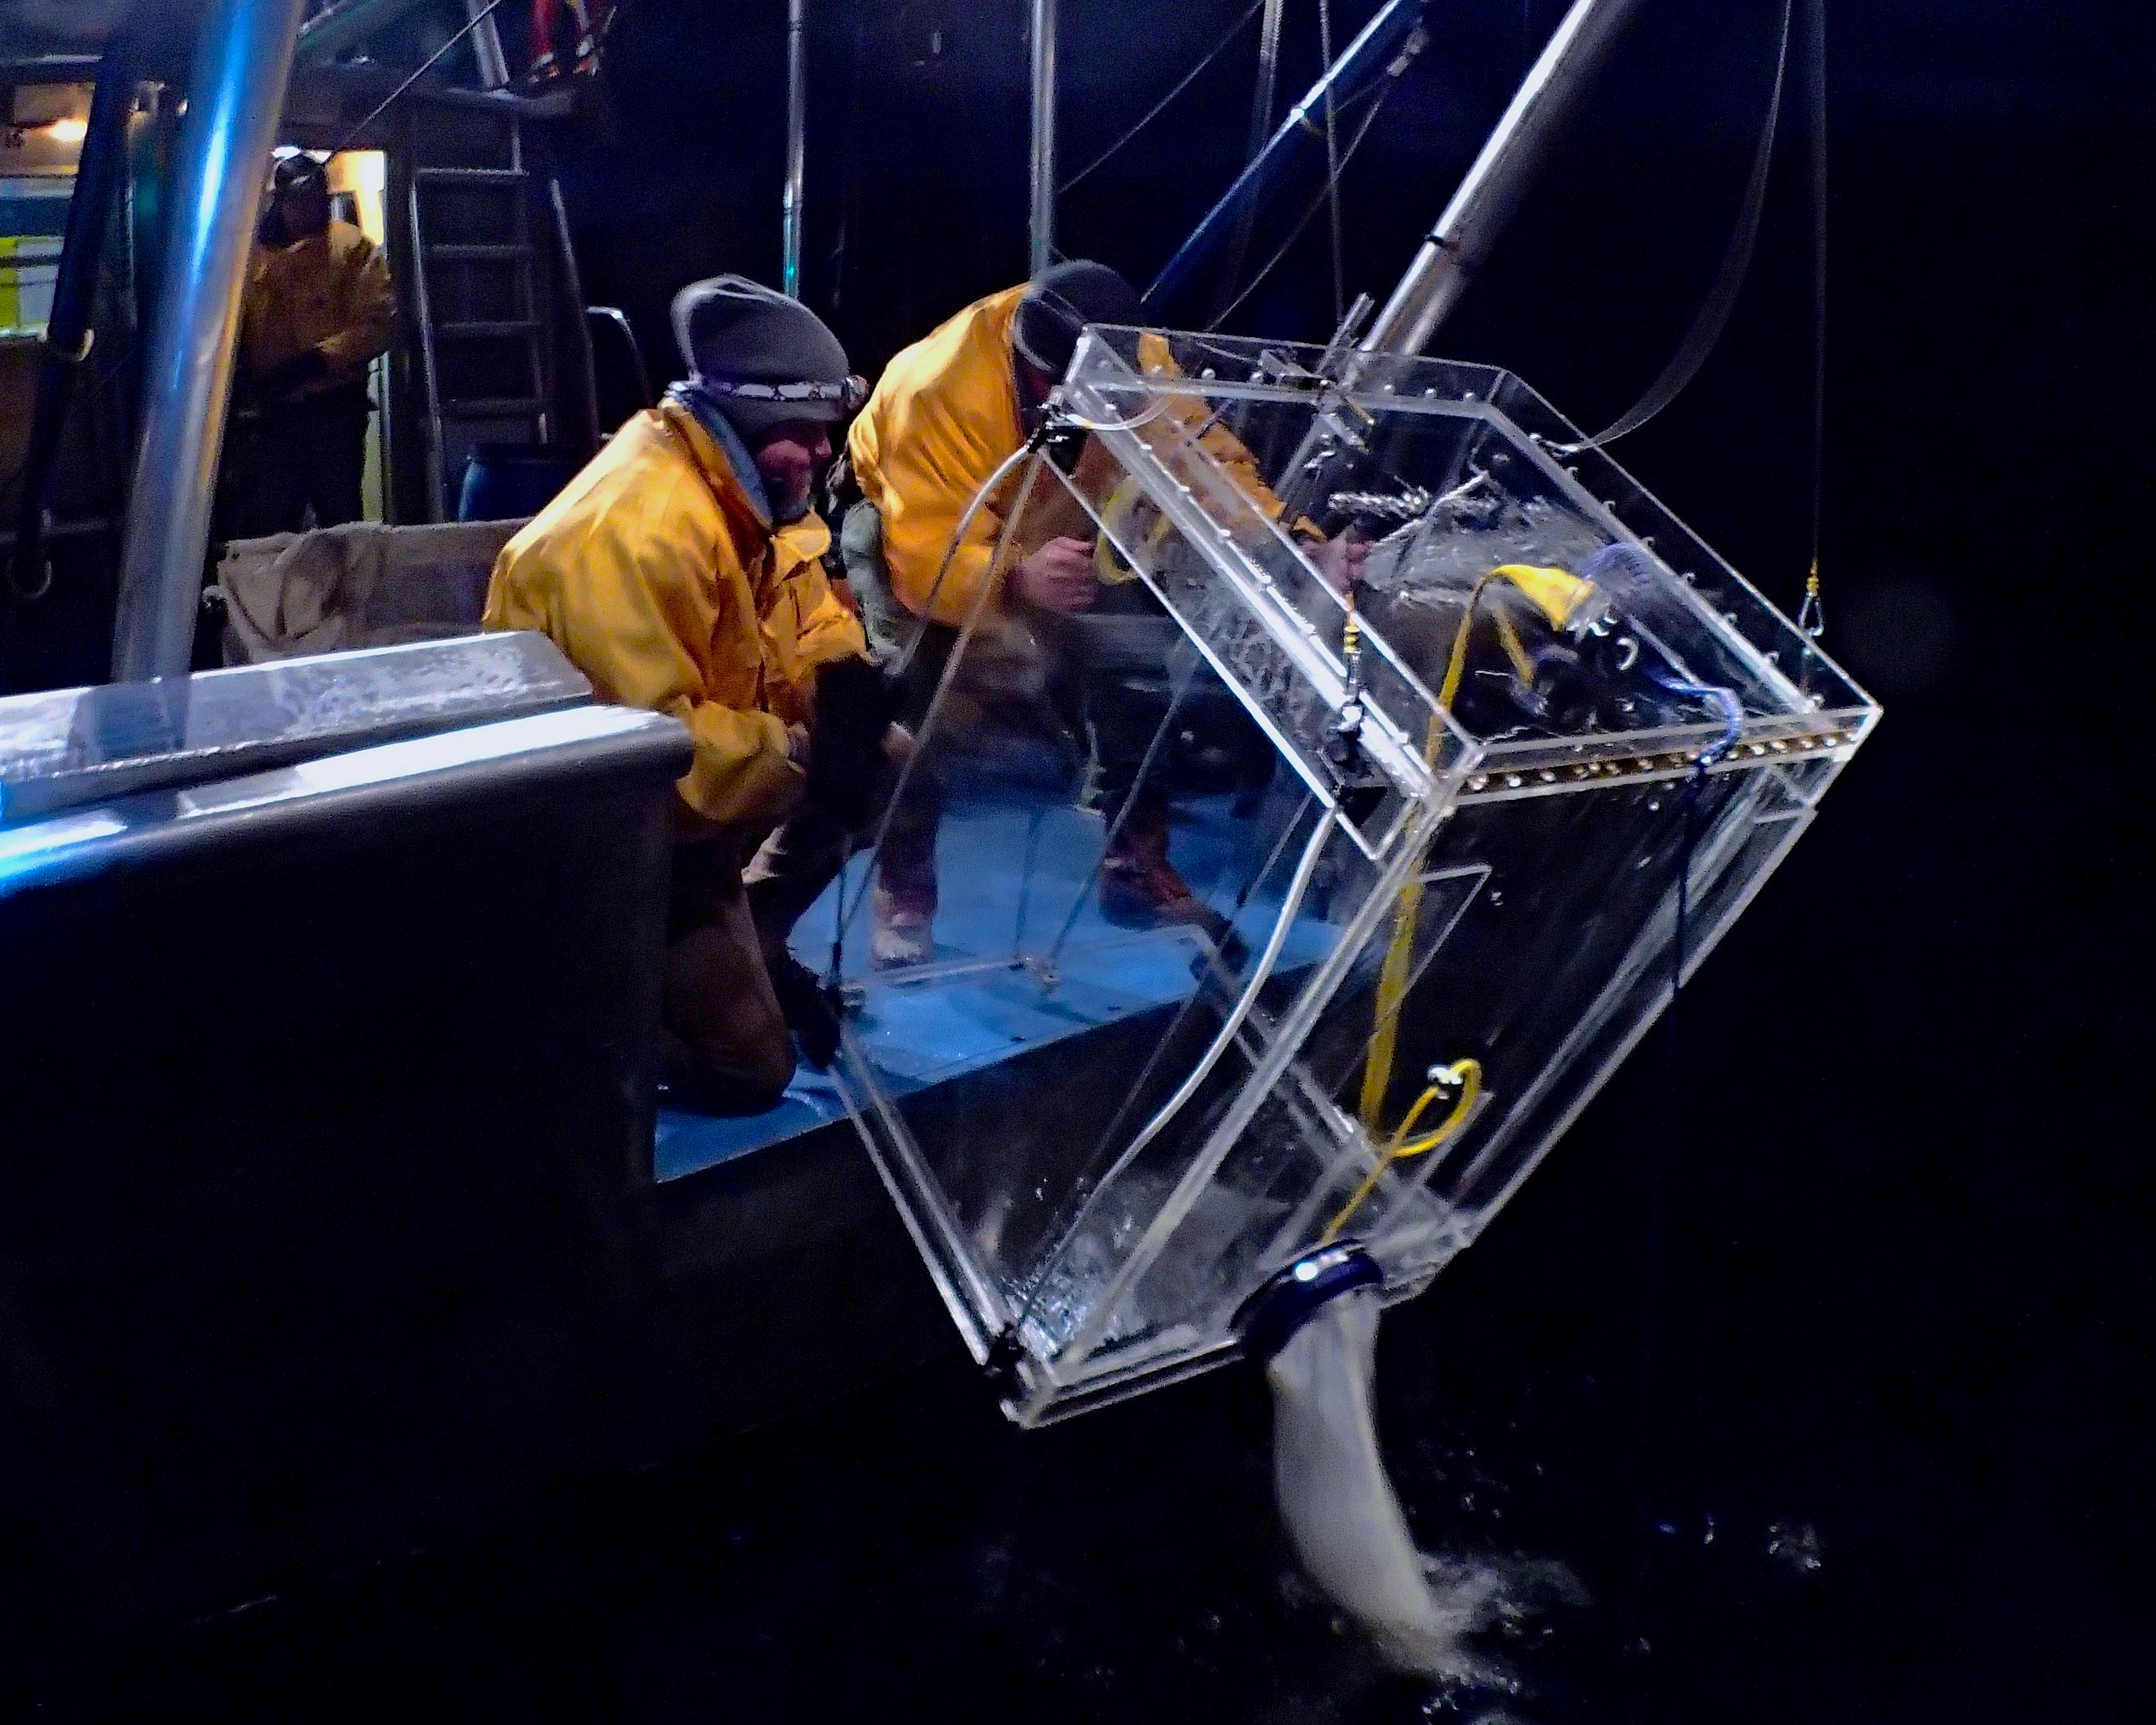 Two men in yellow jackets bring in trawling net from boat in the dark